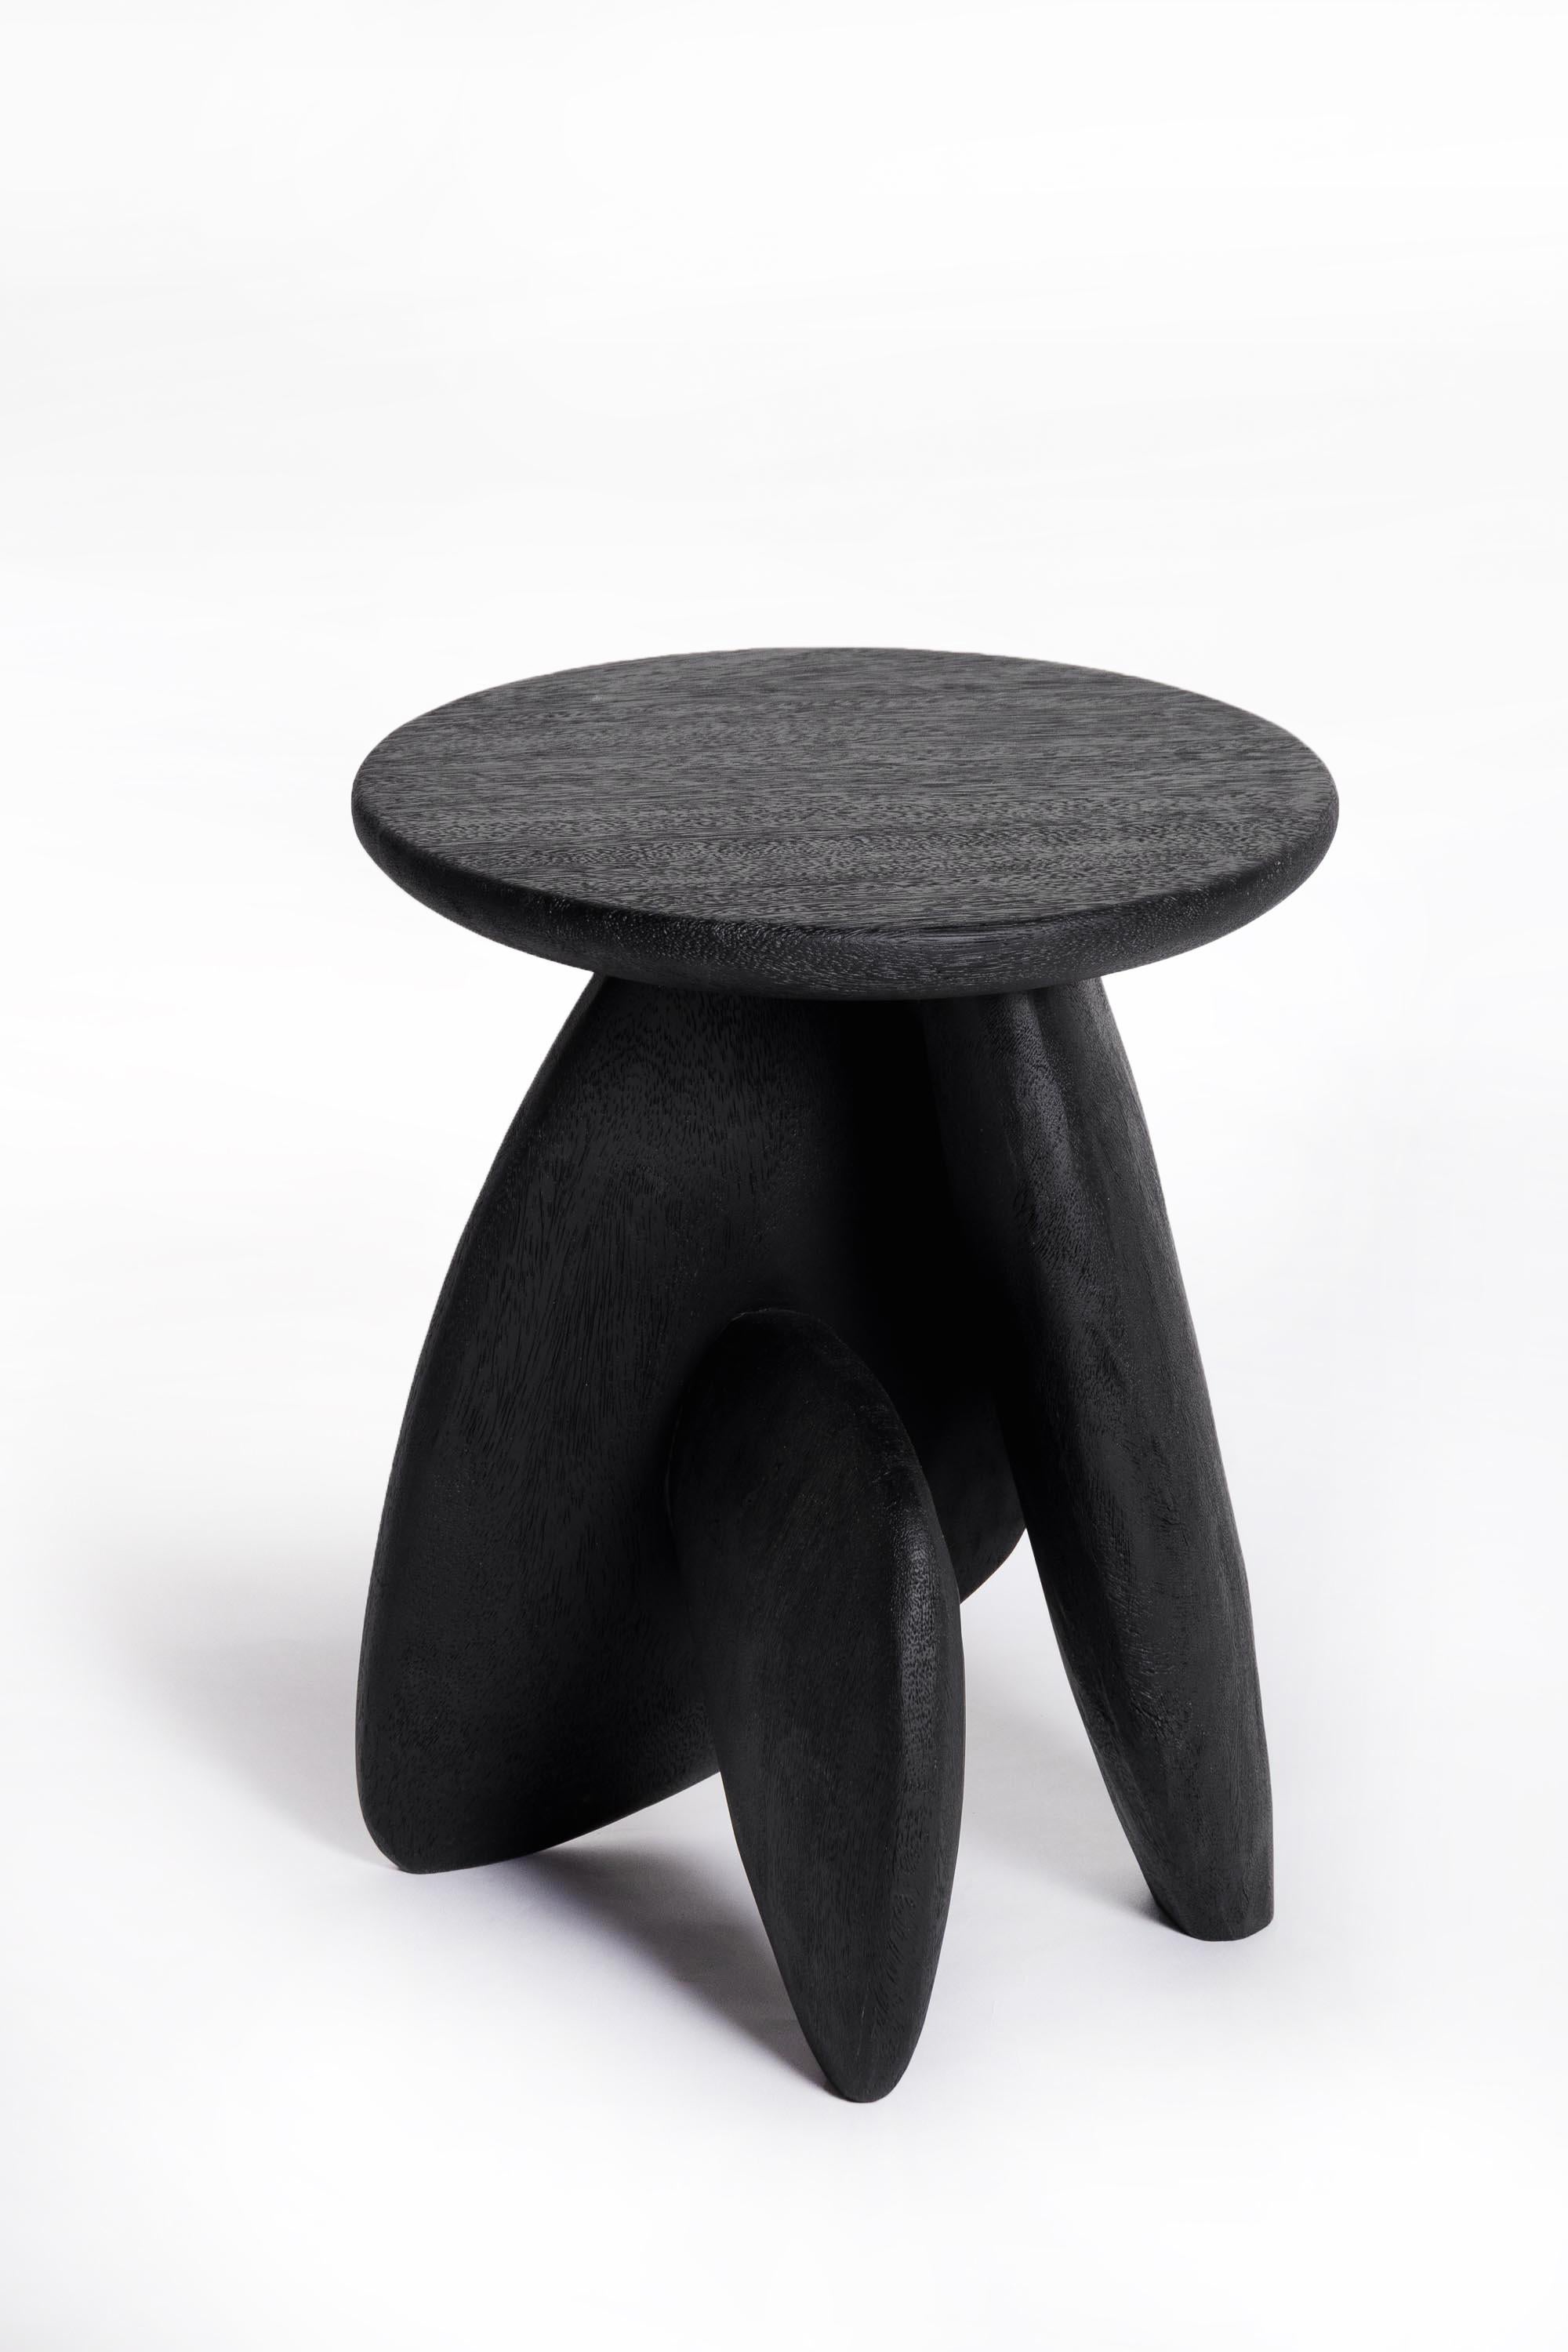 Hand-Crafted Pebble Stool Type 01, Rough Black Acacia Wood For Sale